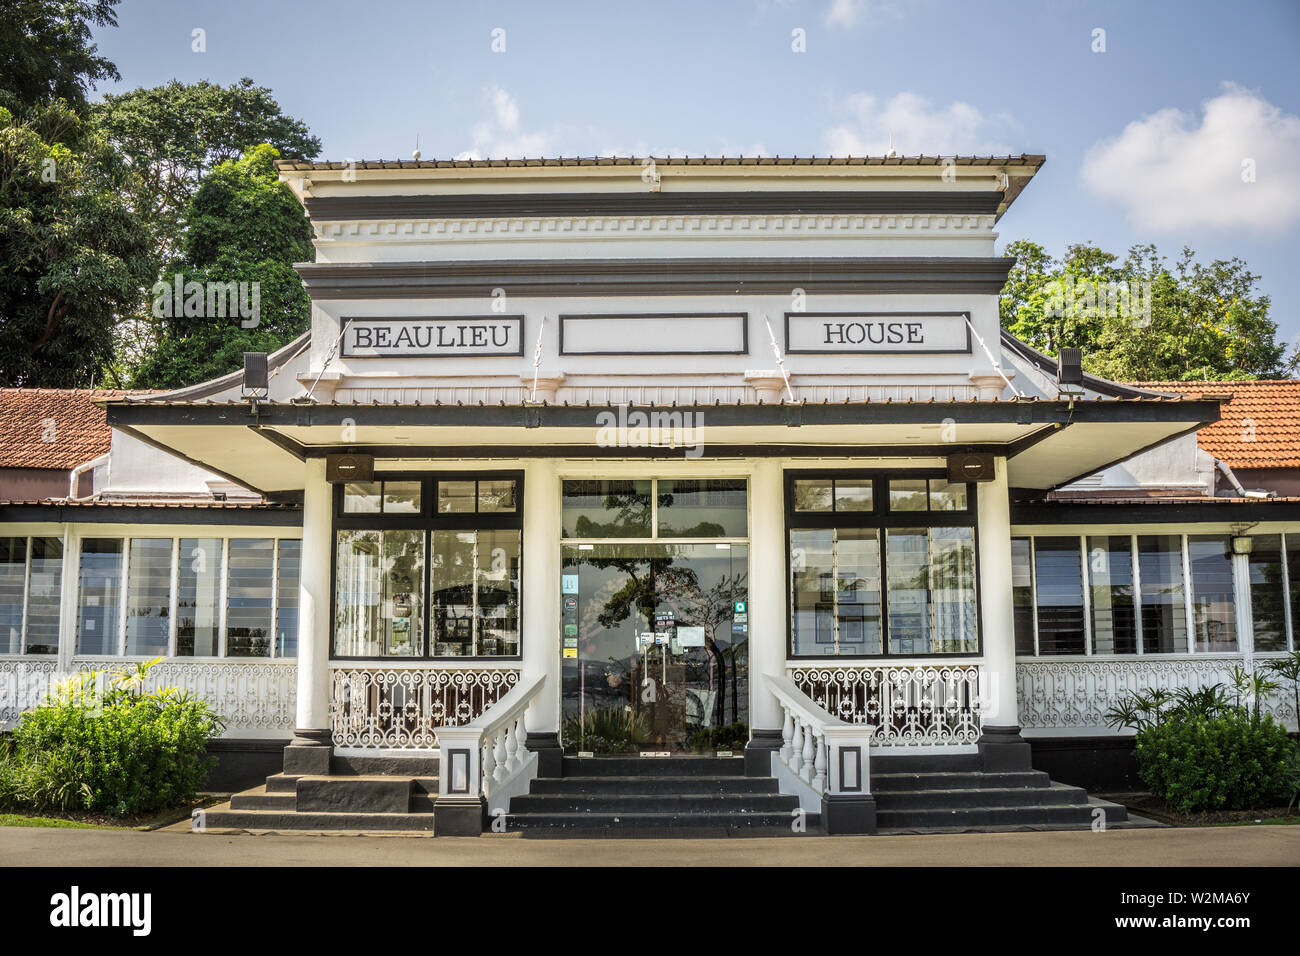 Singapore - Sept 30, 2018: Beaulieu House, built sometime in the 1910s, is located at Sembawang Park in Singapore, overlooking the Straits of Johor. Stock Photo